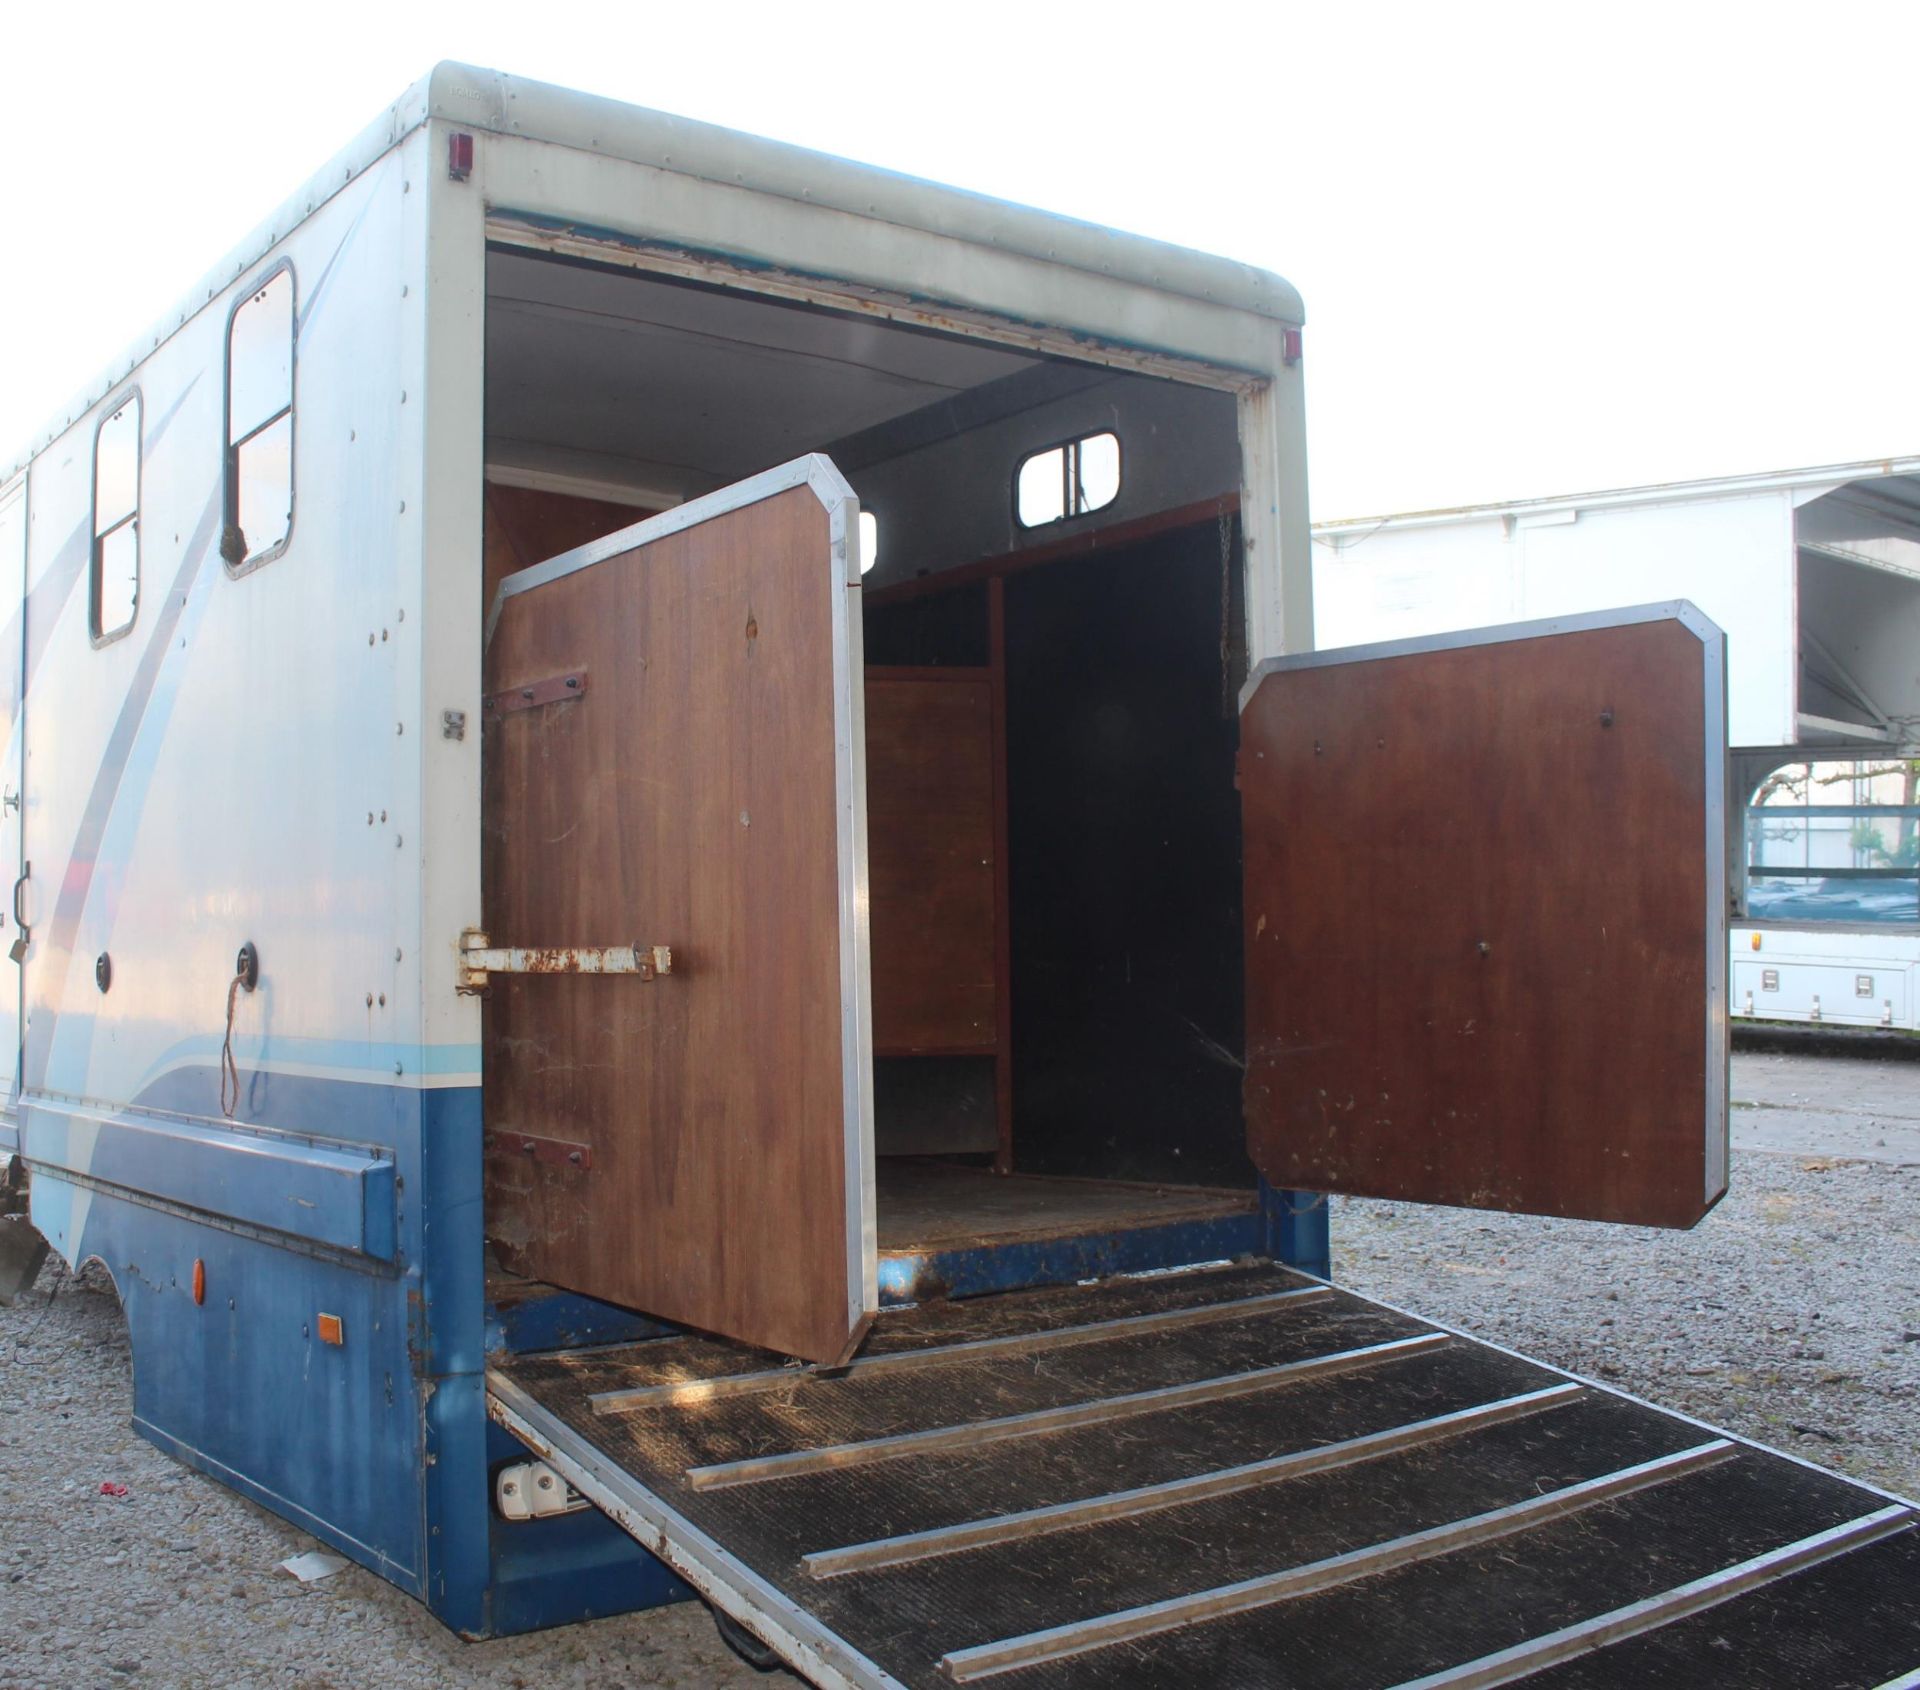 A 17FT HORSE BOX BODY WITH THREE STALLS AND A FRONT SECTION FOR TACK ETC NO VAT - Image 3 of 3